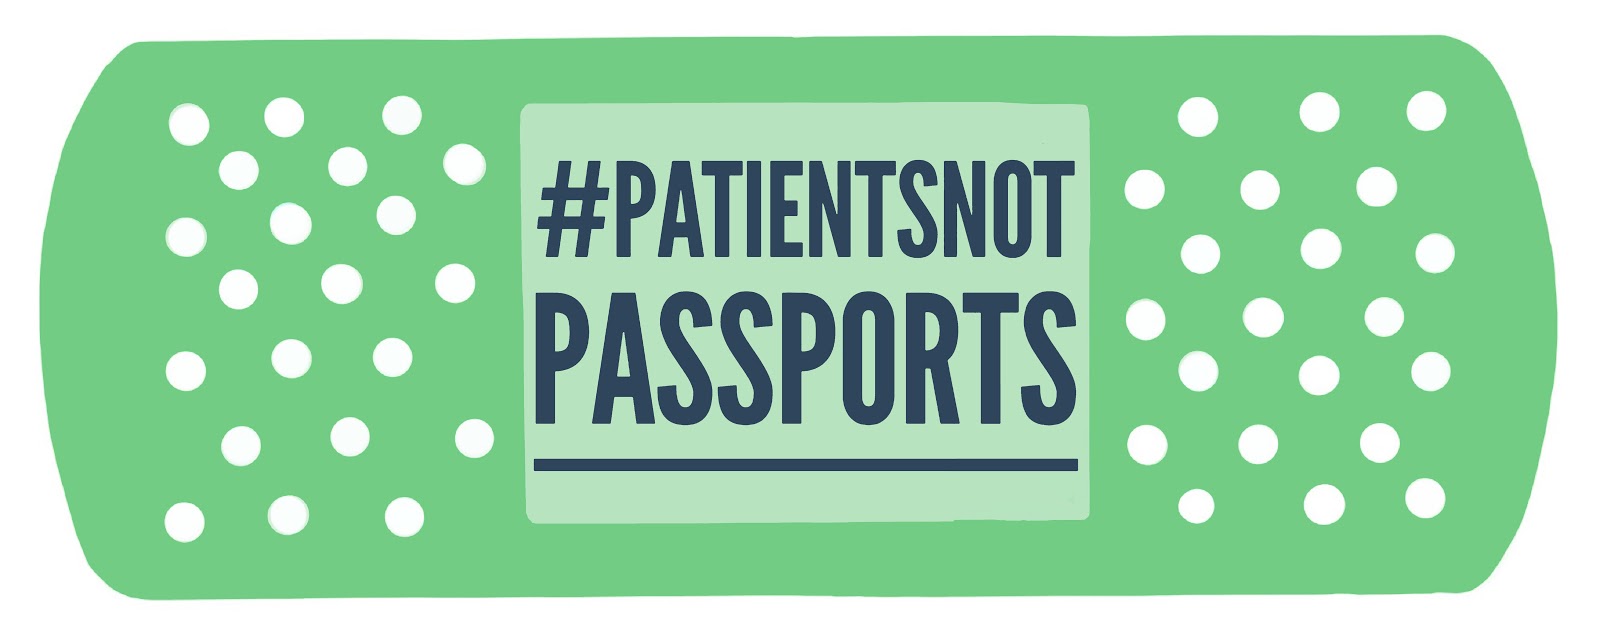 Patients Not Passports National Network Meeting